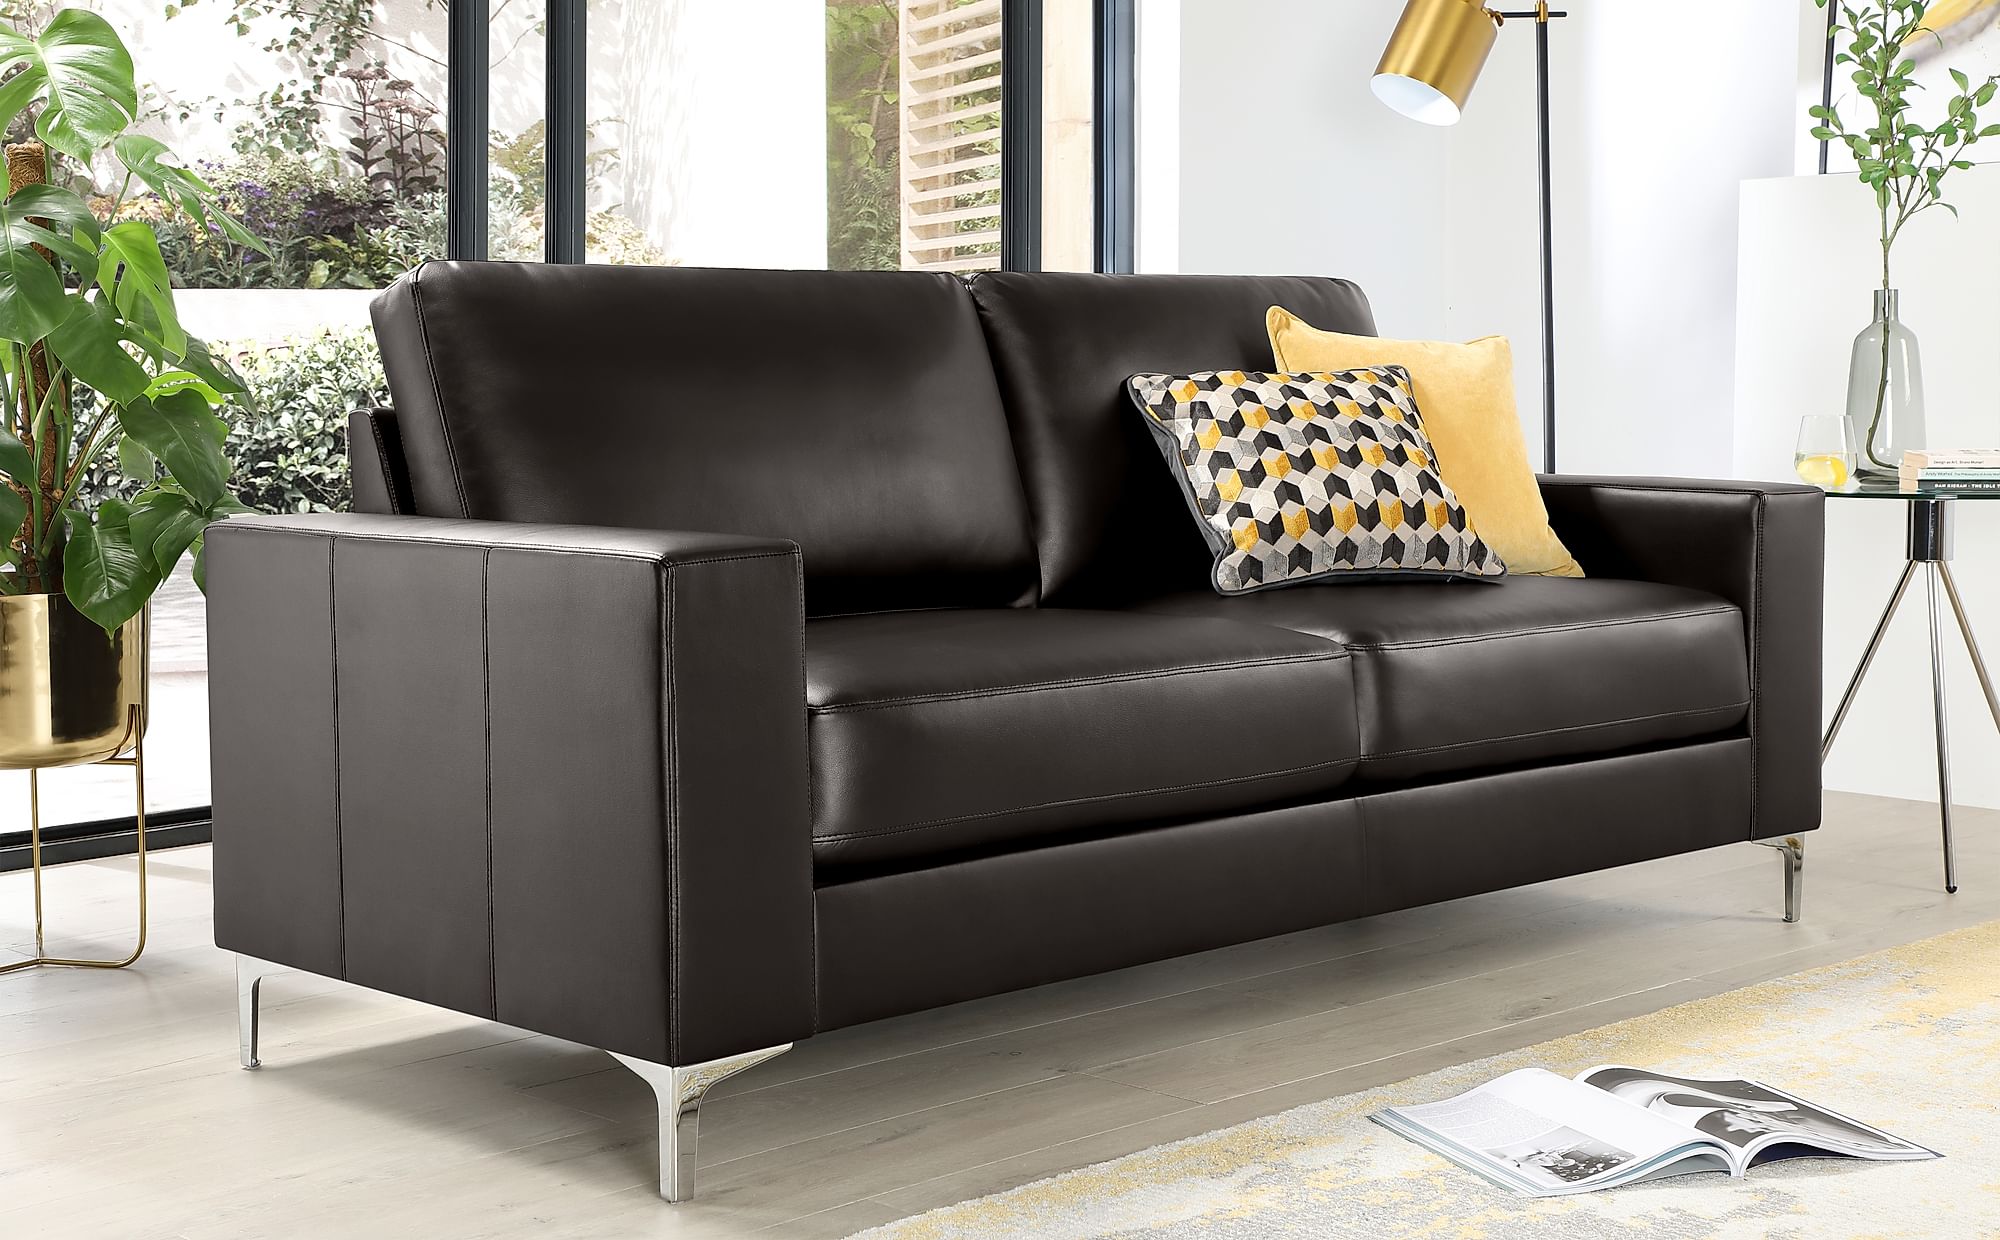 4 seater leather recliner sofa for sale uk